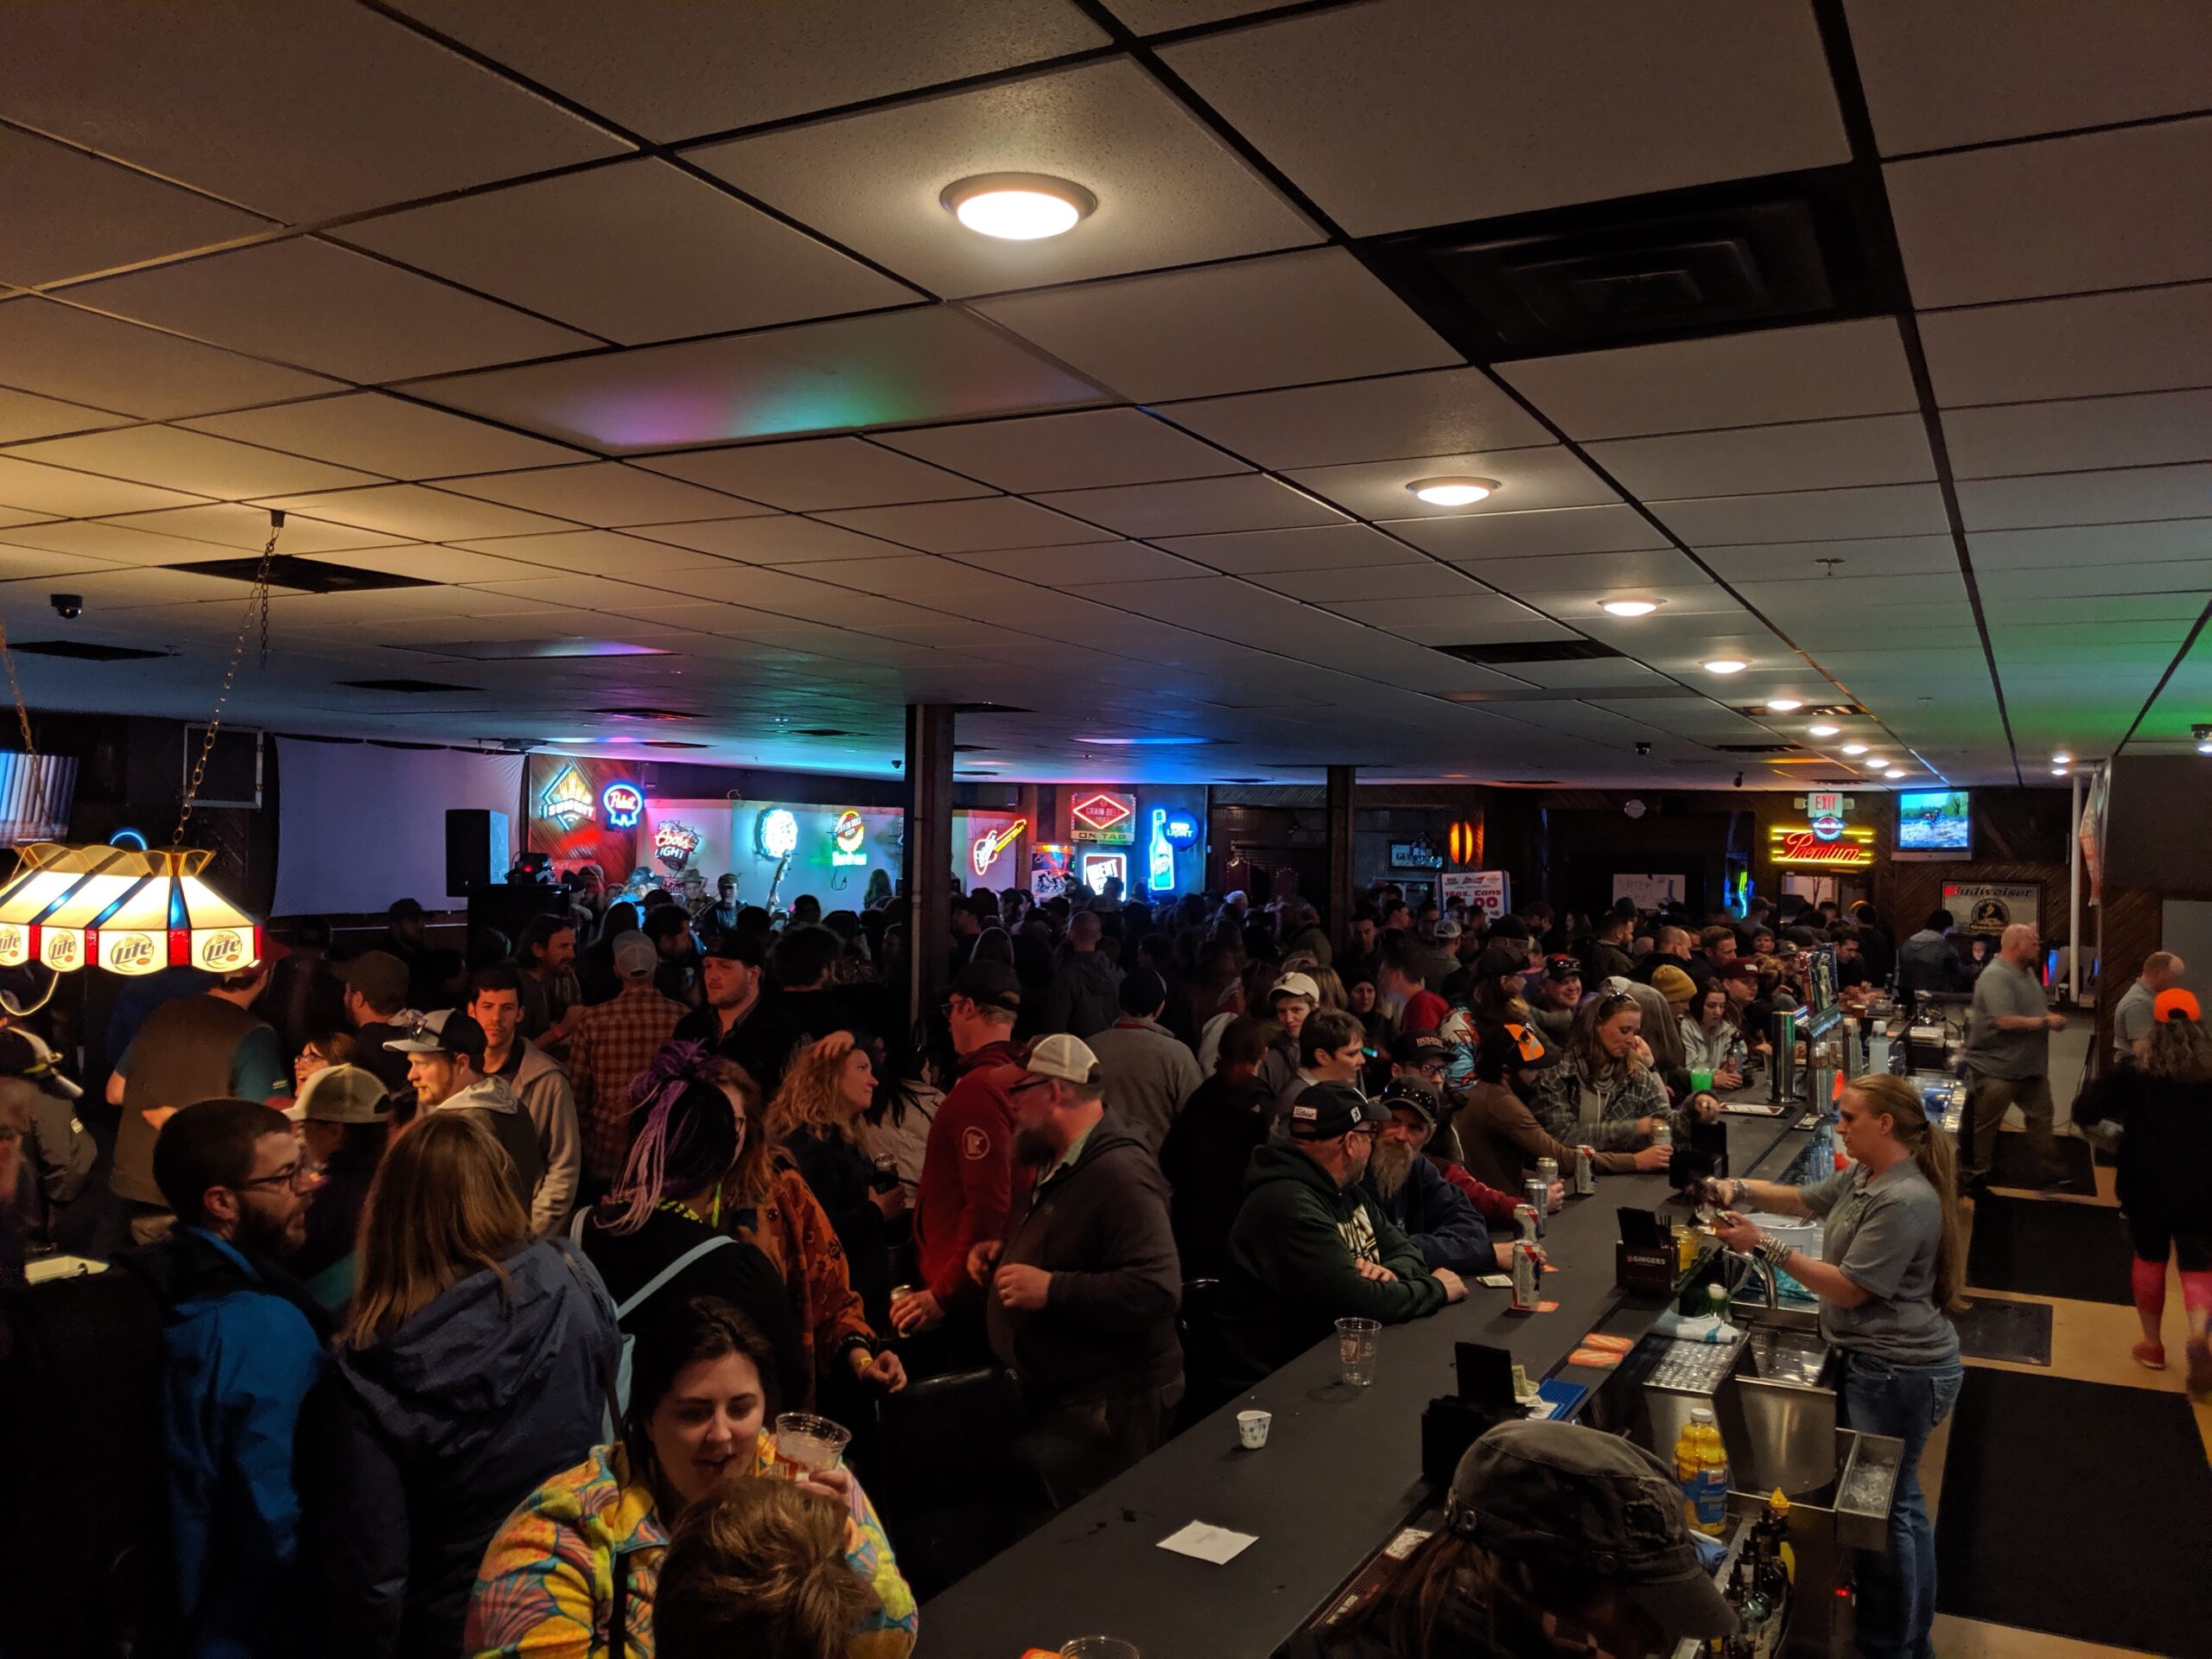 Live Music events are no sweat with our large floorplan and 50' bar!